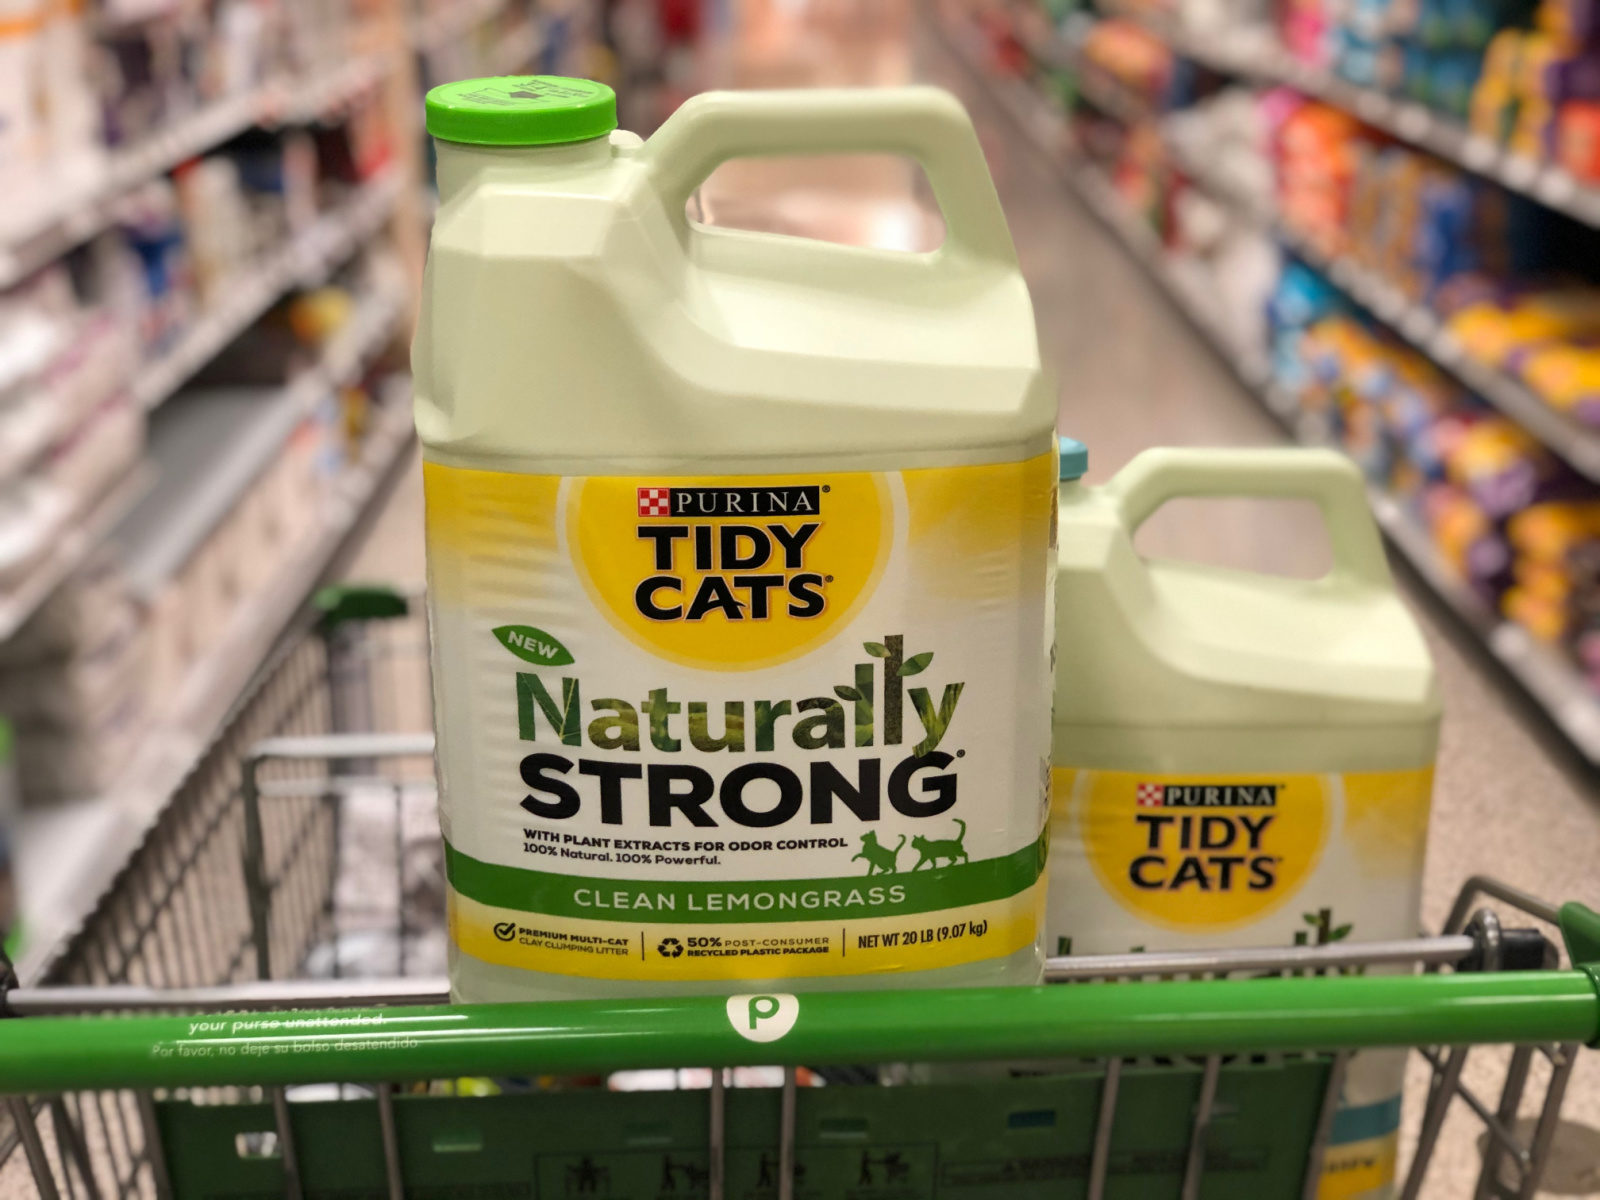 Purina Tidy Cats Naturally Strong Litter As Low As 6.50 (Less Than